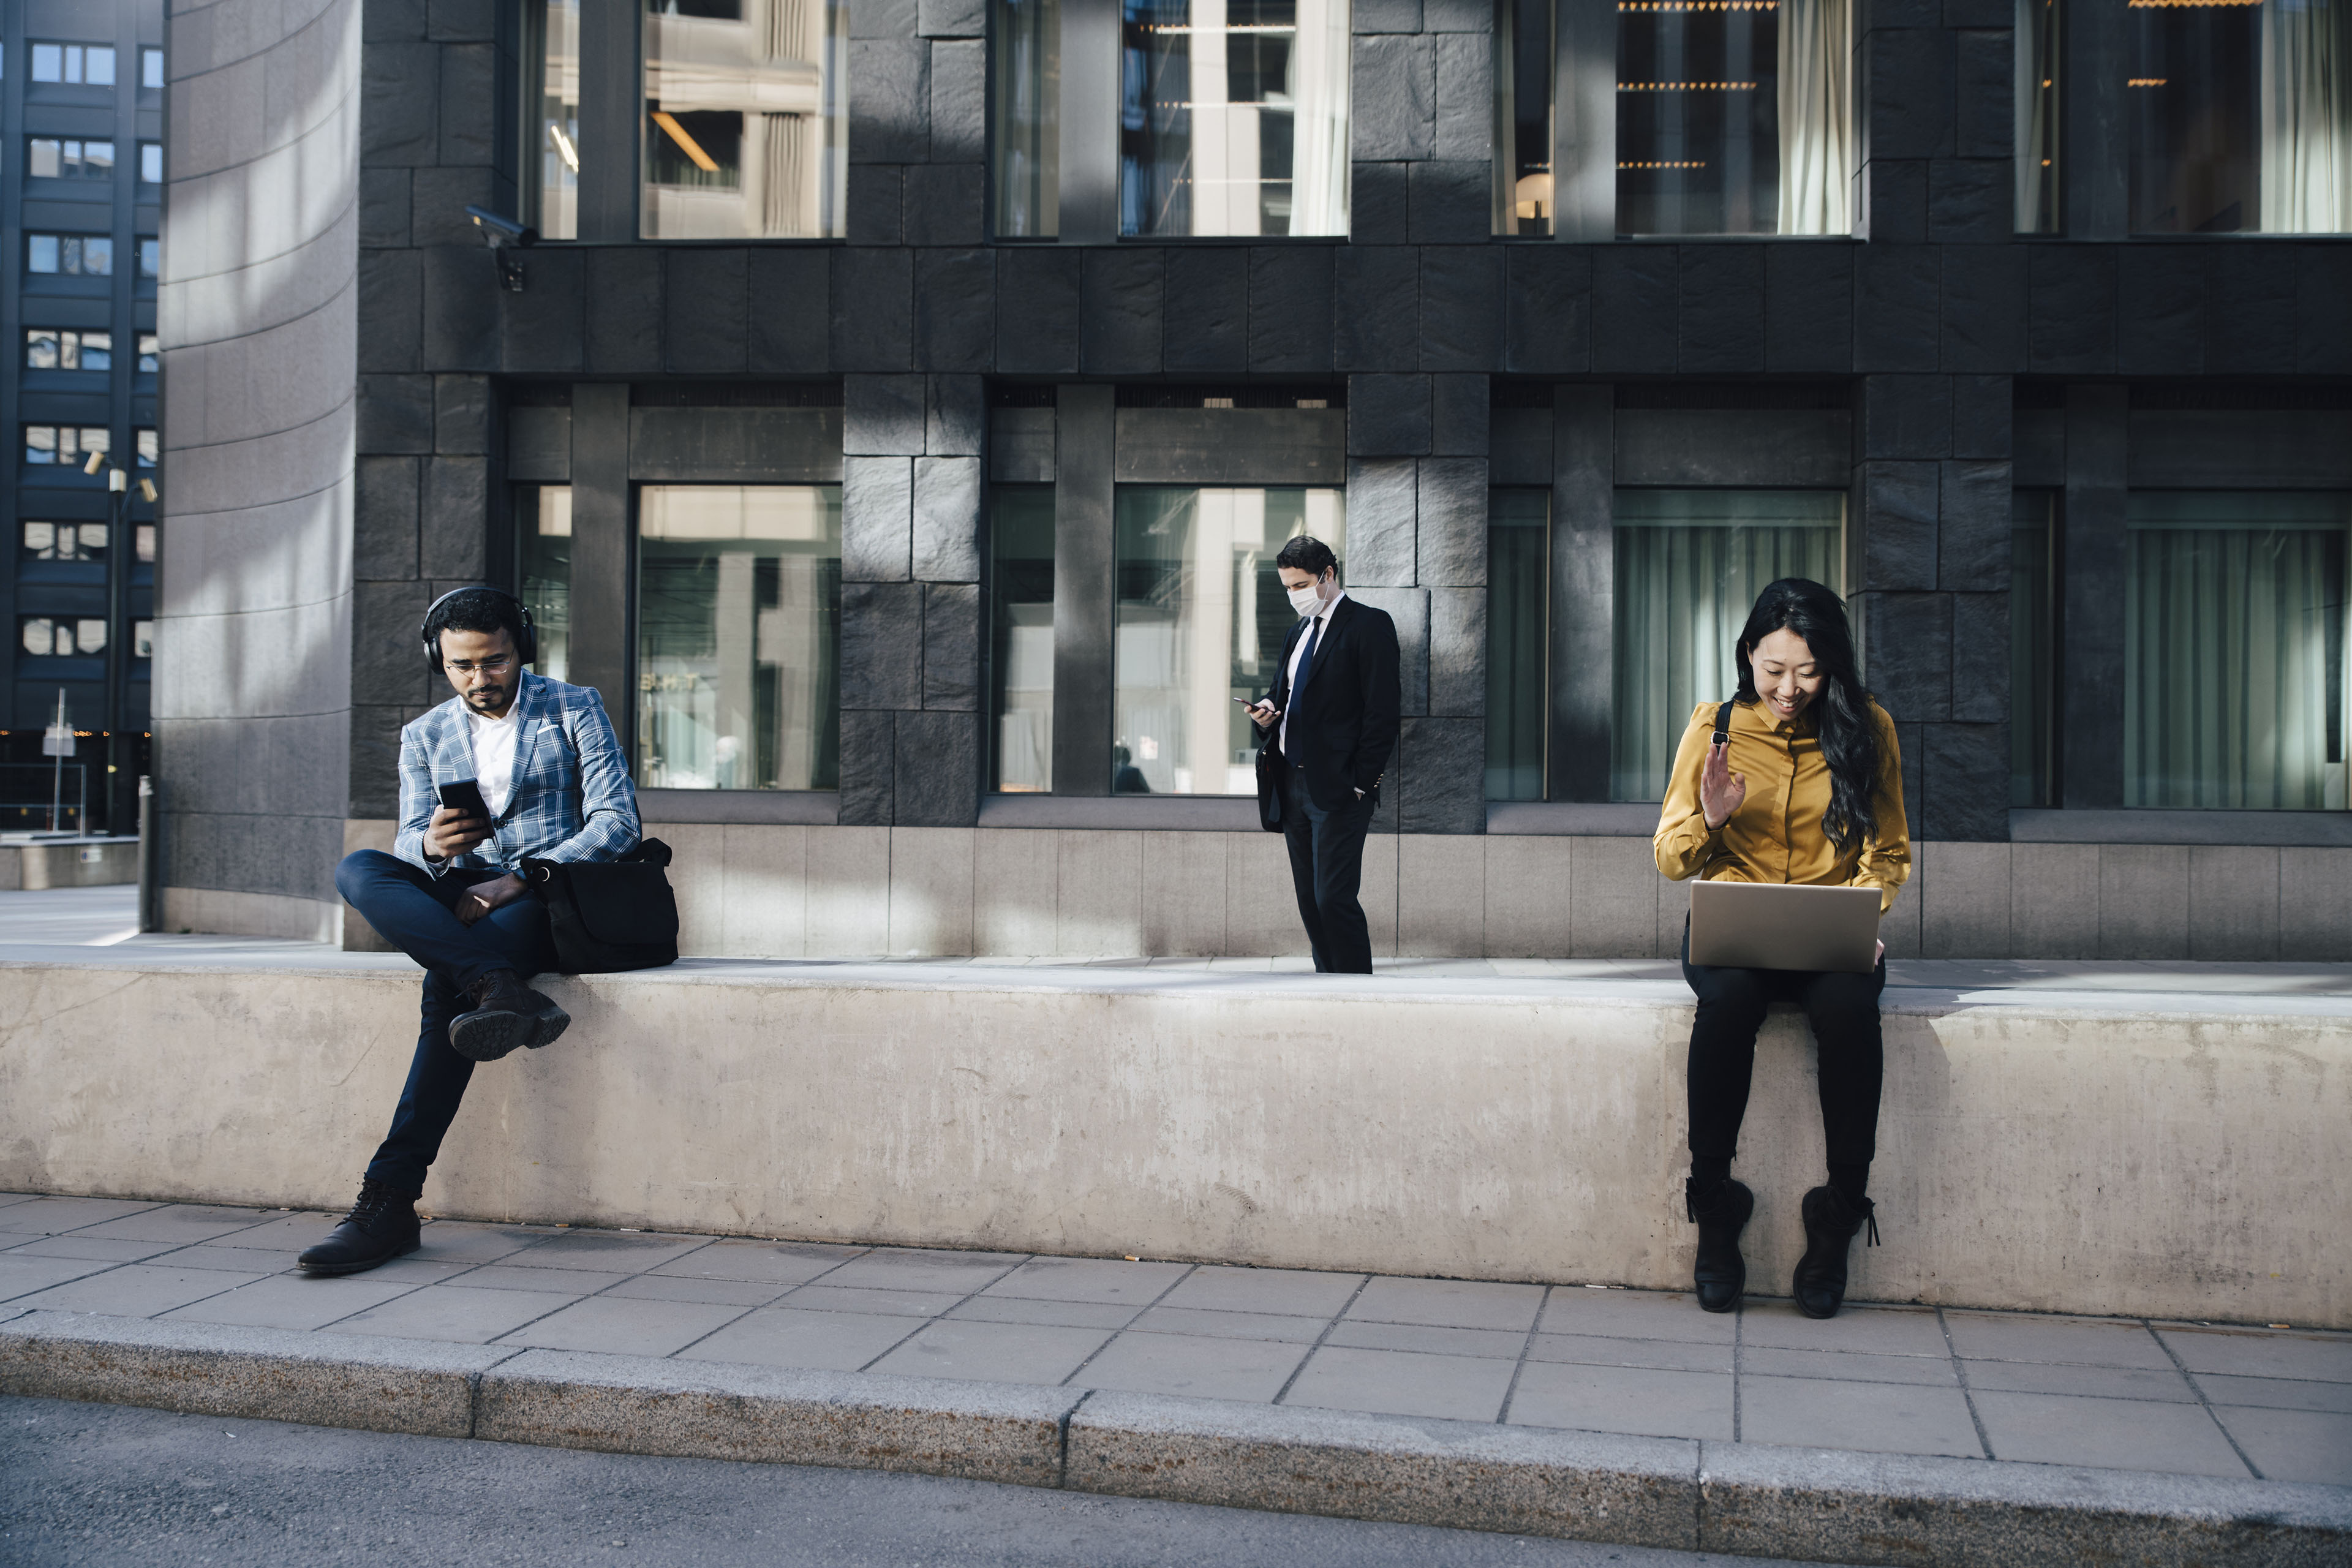 Social distancing business people working outdoors